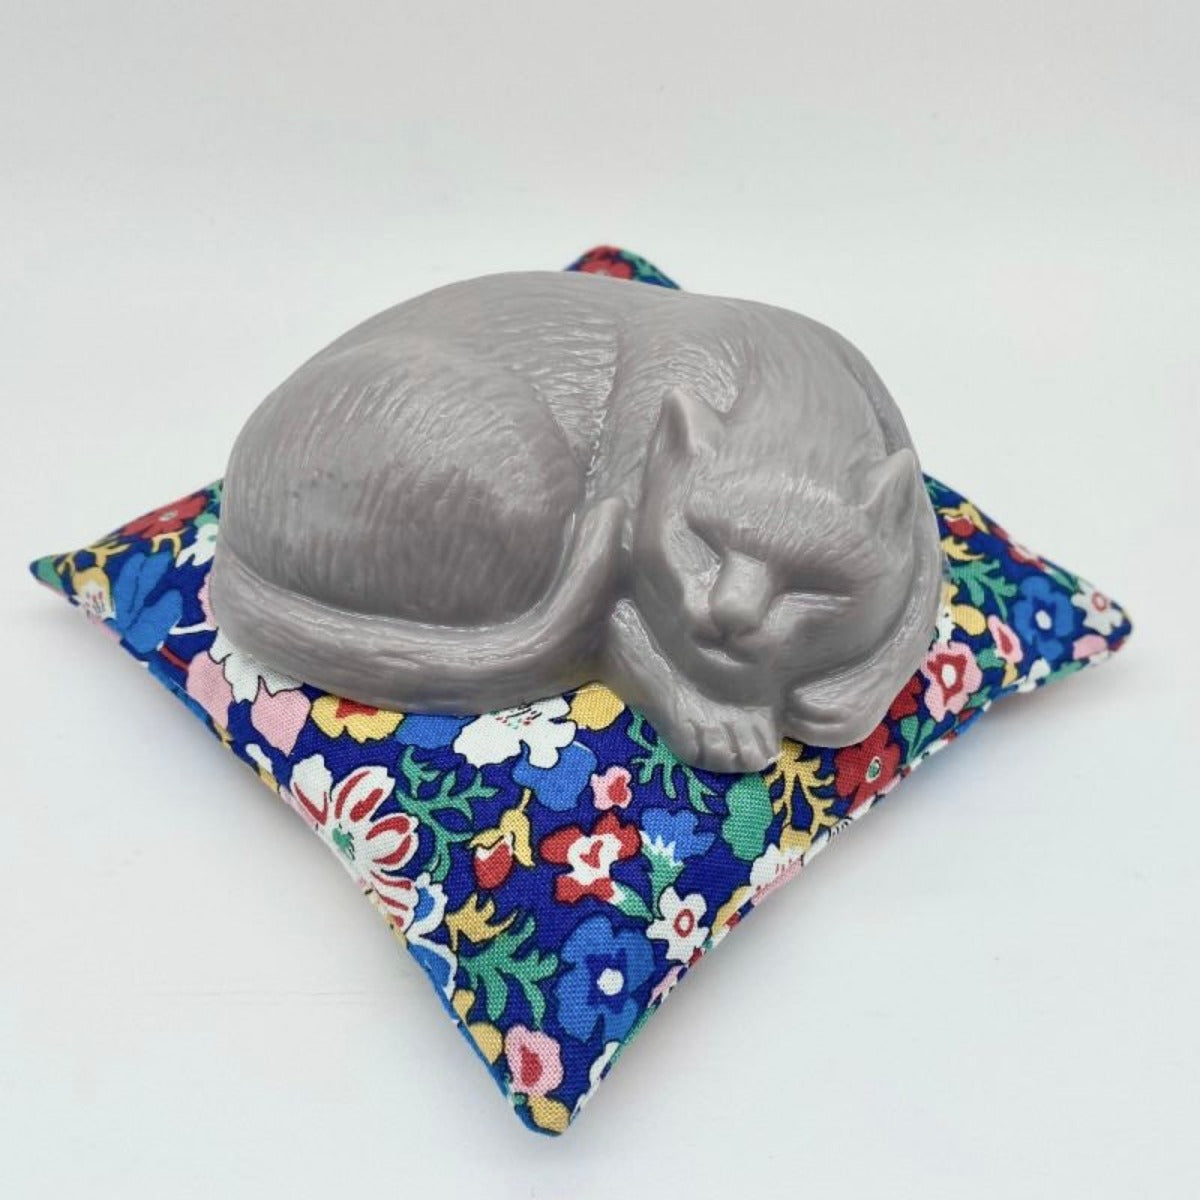 Gray sleeping cat-shaped soap on a colorful bohemian paisley flower print square pillow